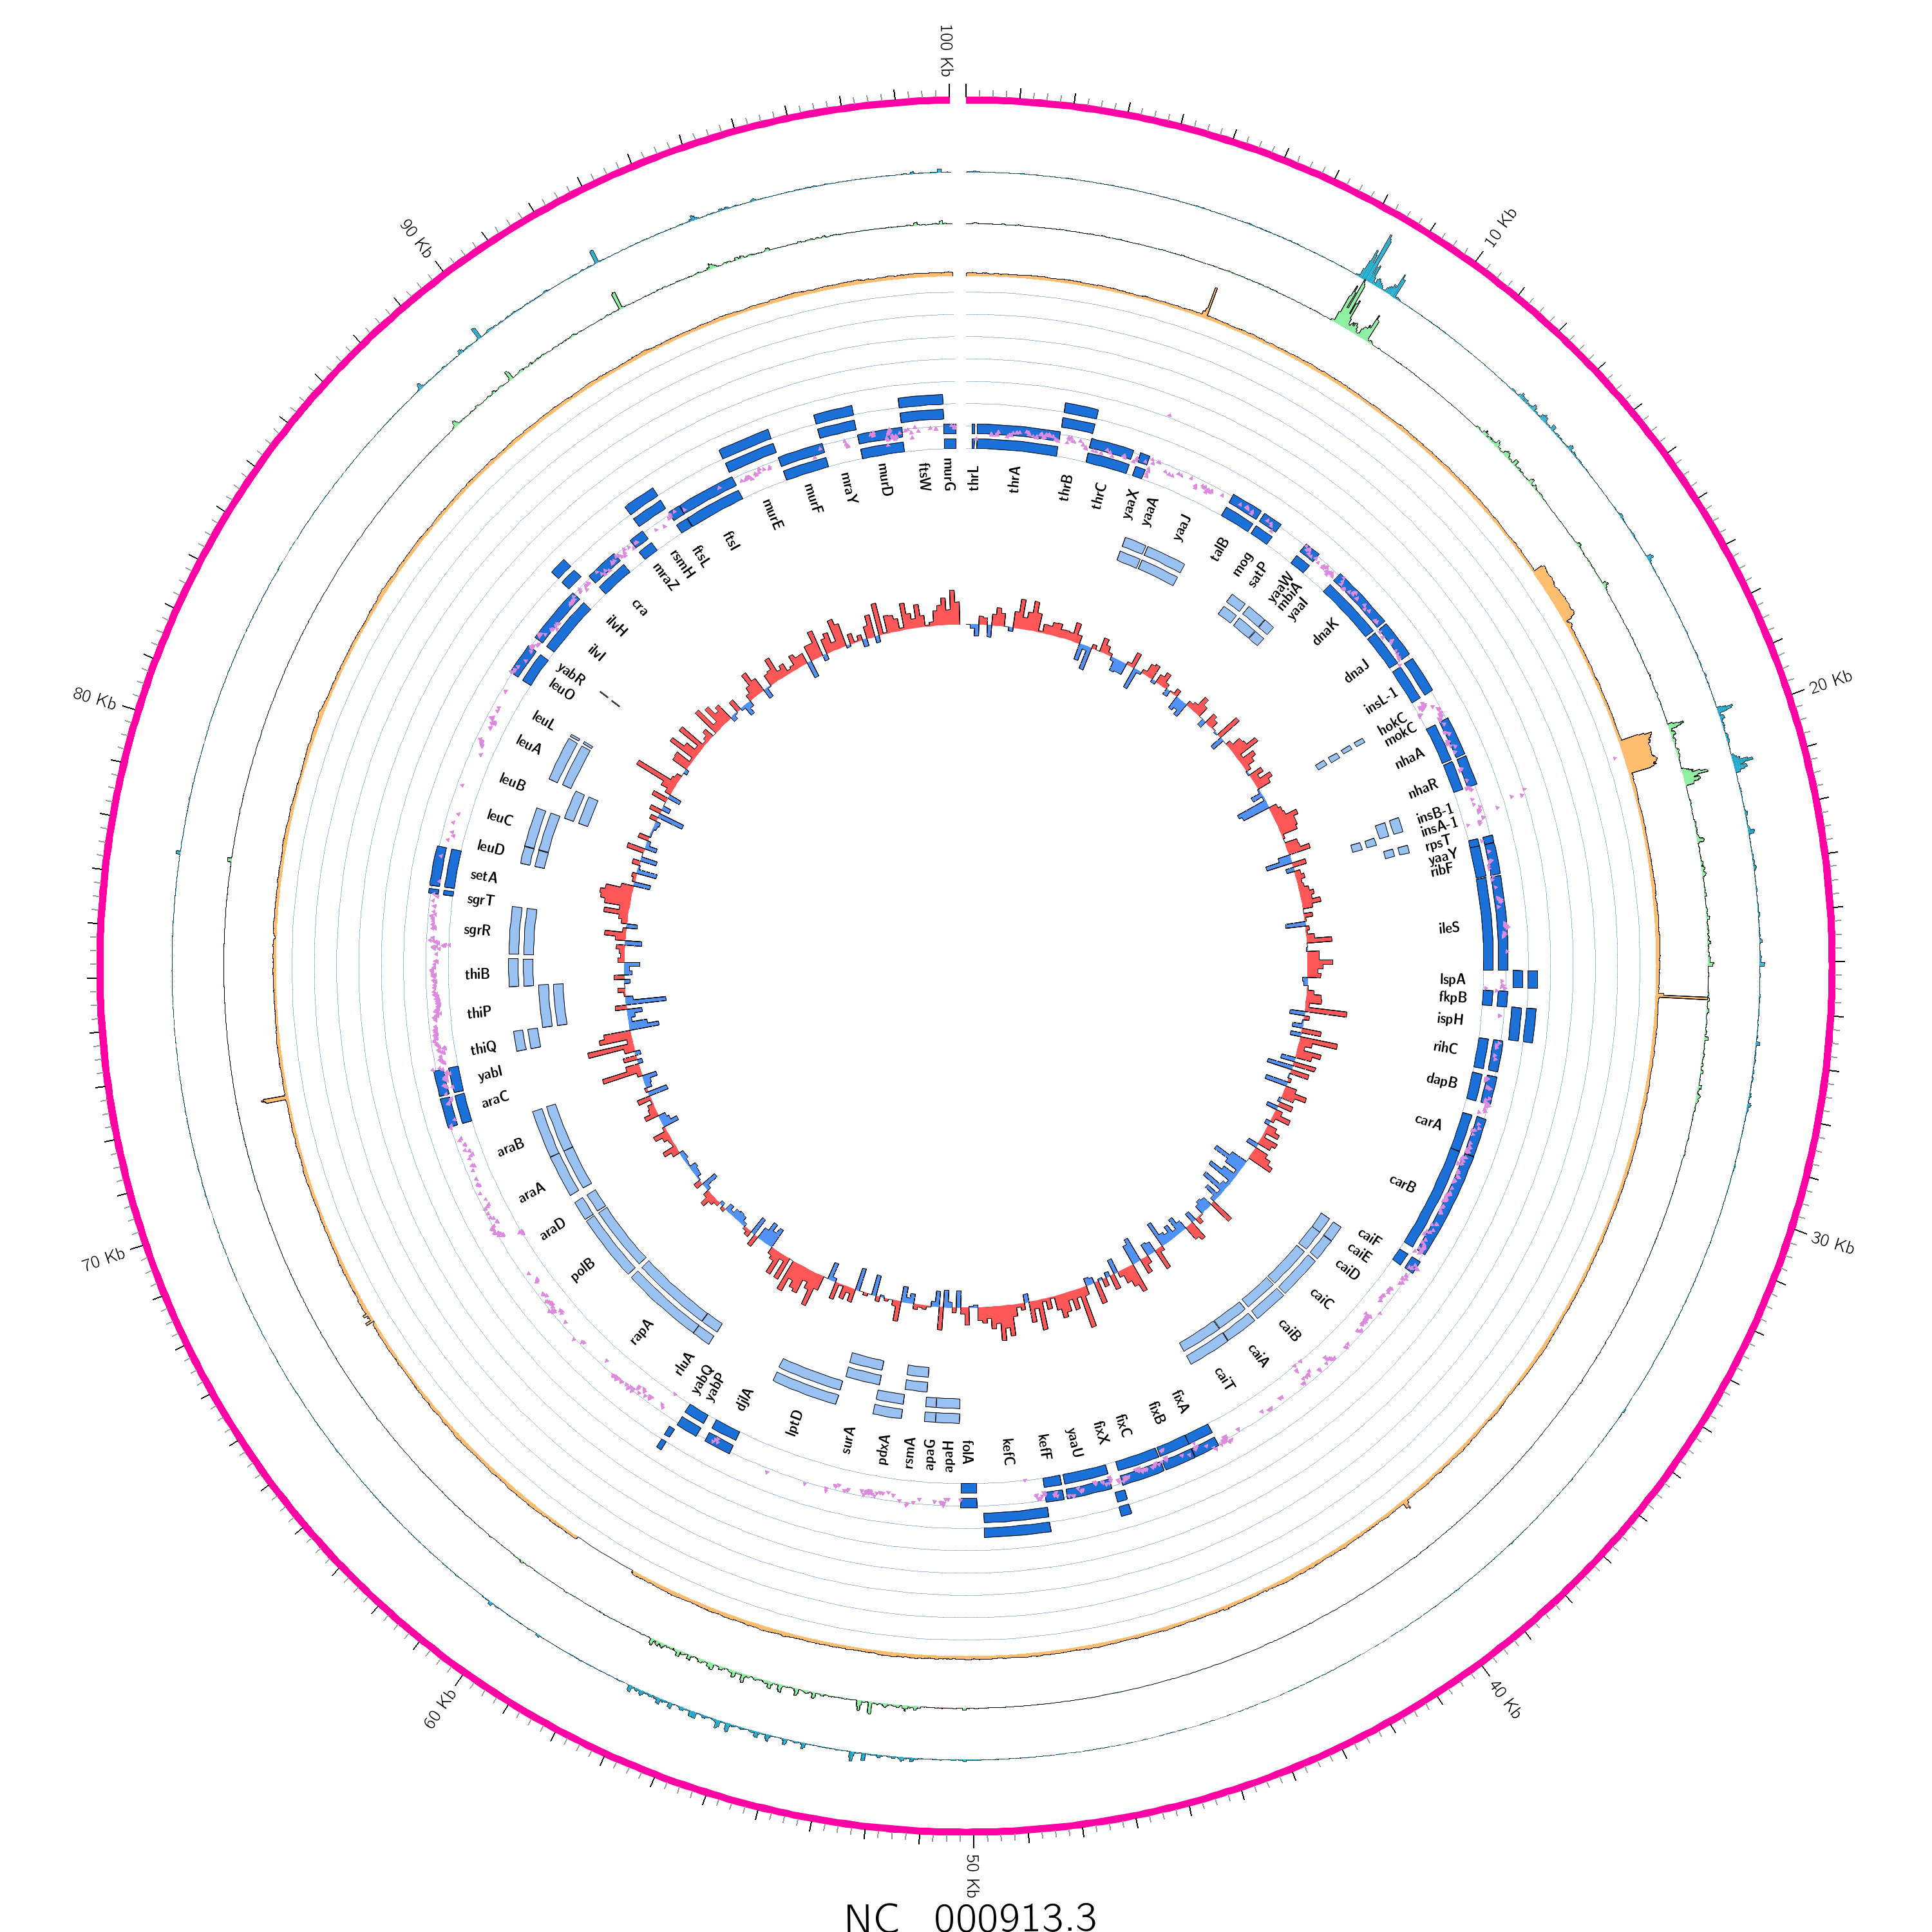 plot of NC_000913 showing a range of datasets, from outside to in: a pink band representing the genome, two rna seq datasets and a dna seq coverage dataset showing coverage spikes around 10 and 20kb. Next inside is an overlapping set of genes presumably on the plus strand in dark blue overlapped with lilac triangles representing variants. Next a set of gene names, and finally a set of minus strand genes before a GC skew map in red and blue.